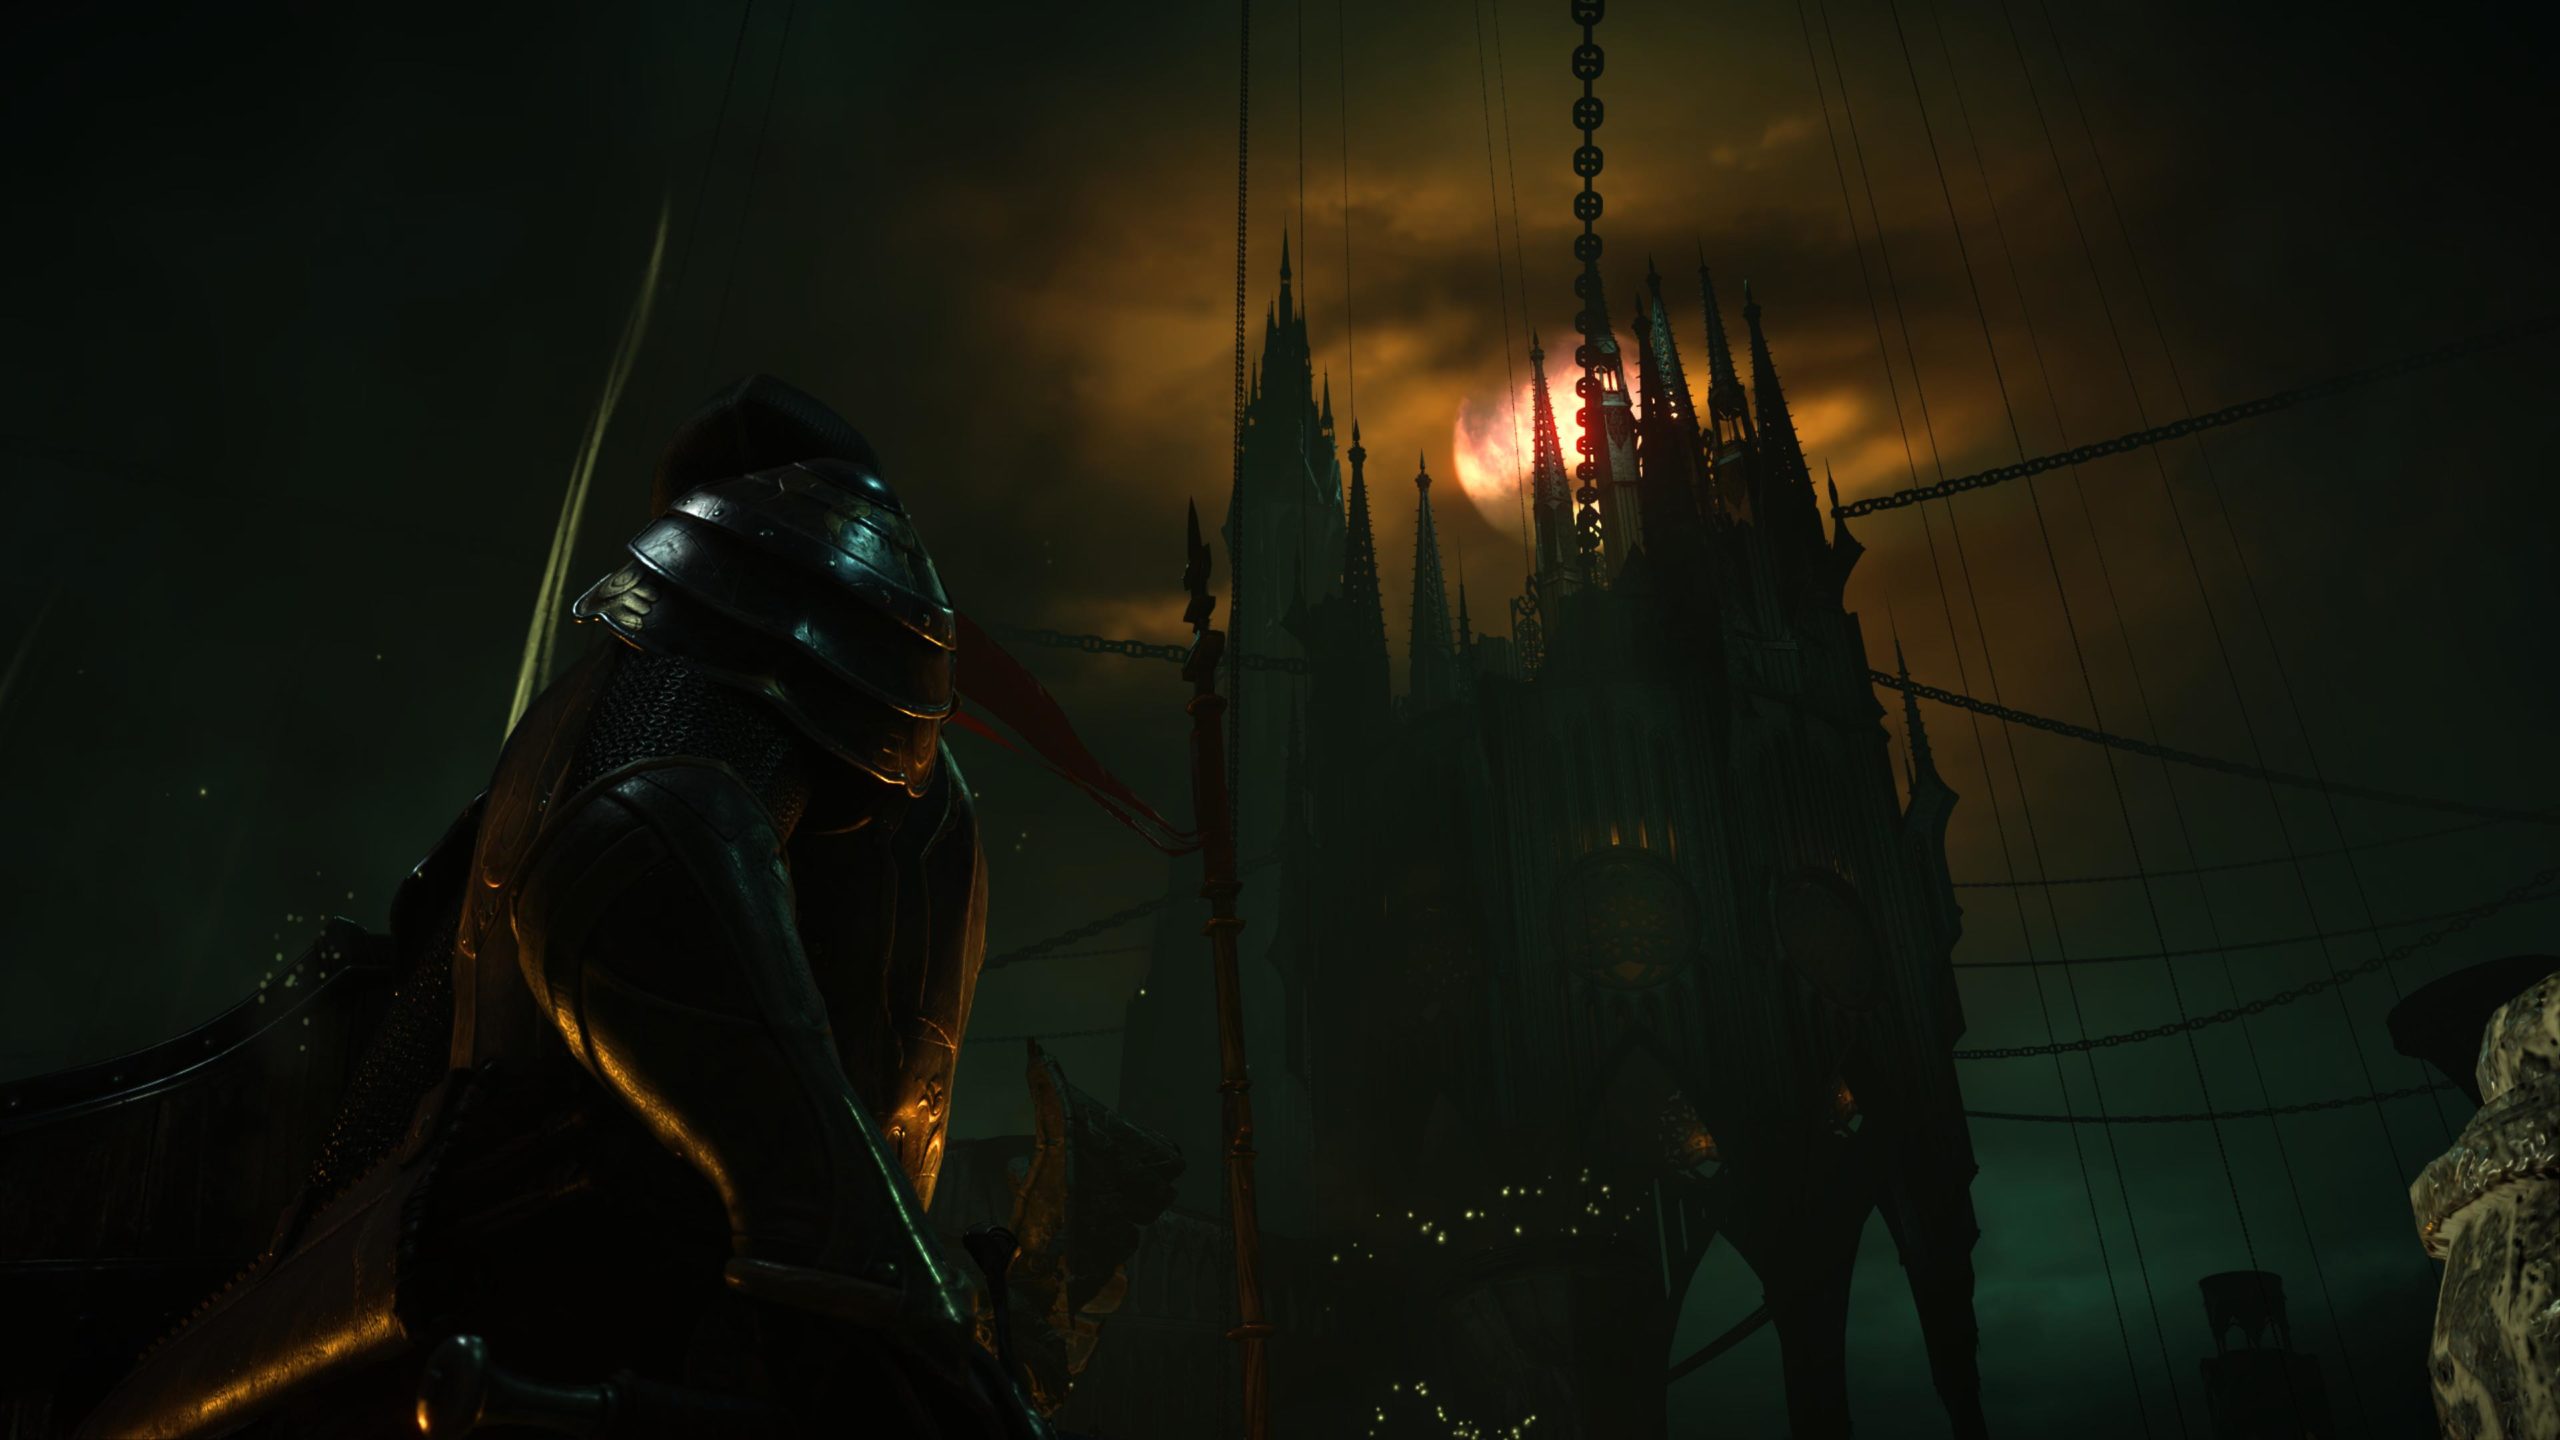 Demon Souls stands out as one of the most beautiful PS5 launch